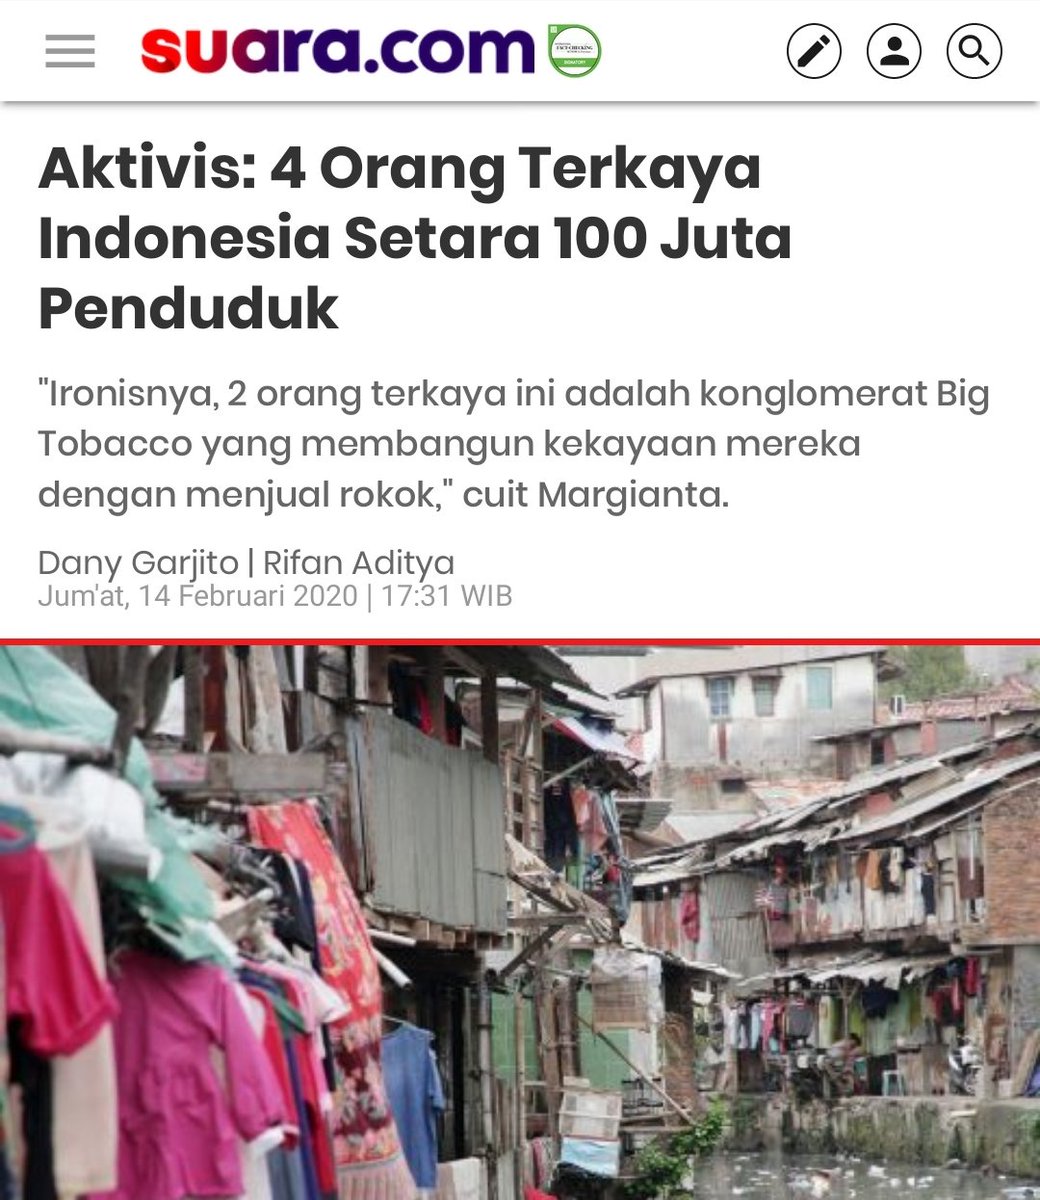 Indonesia: "We are now an upper middle income country."Also Indonesia: